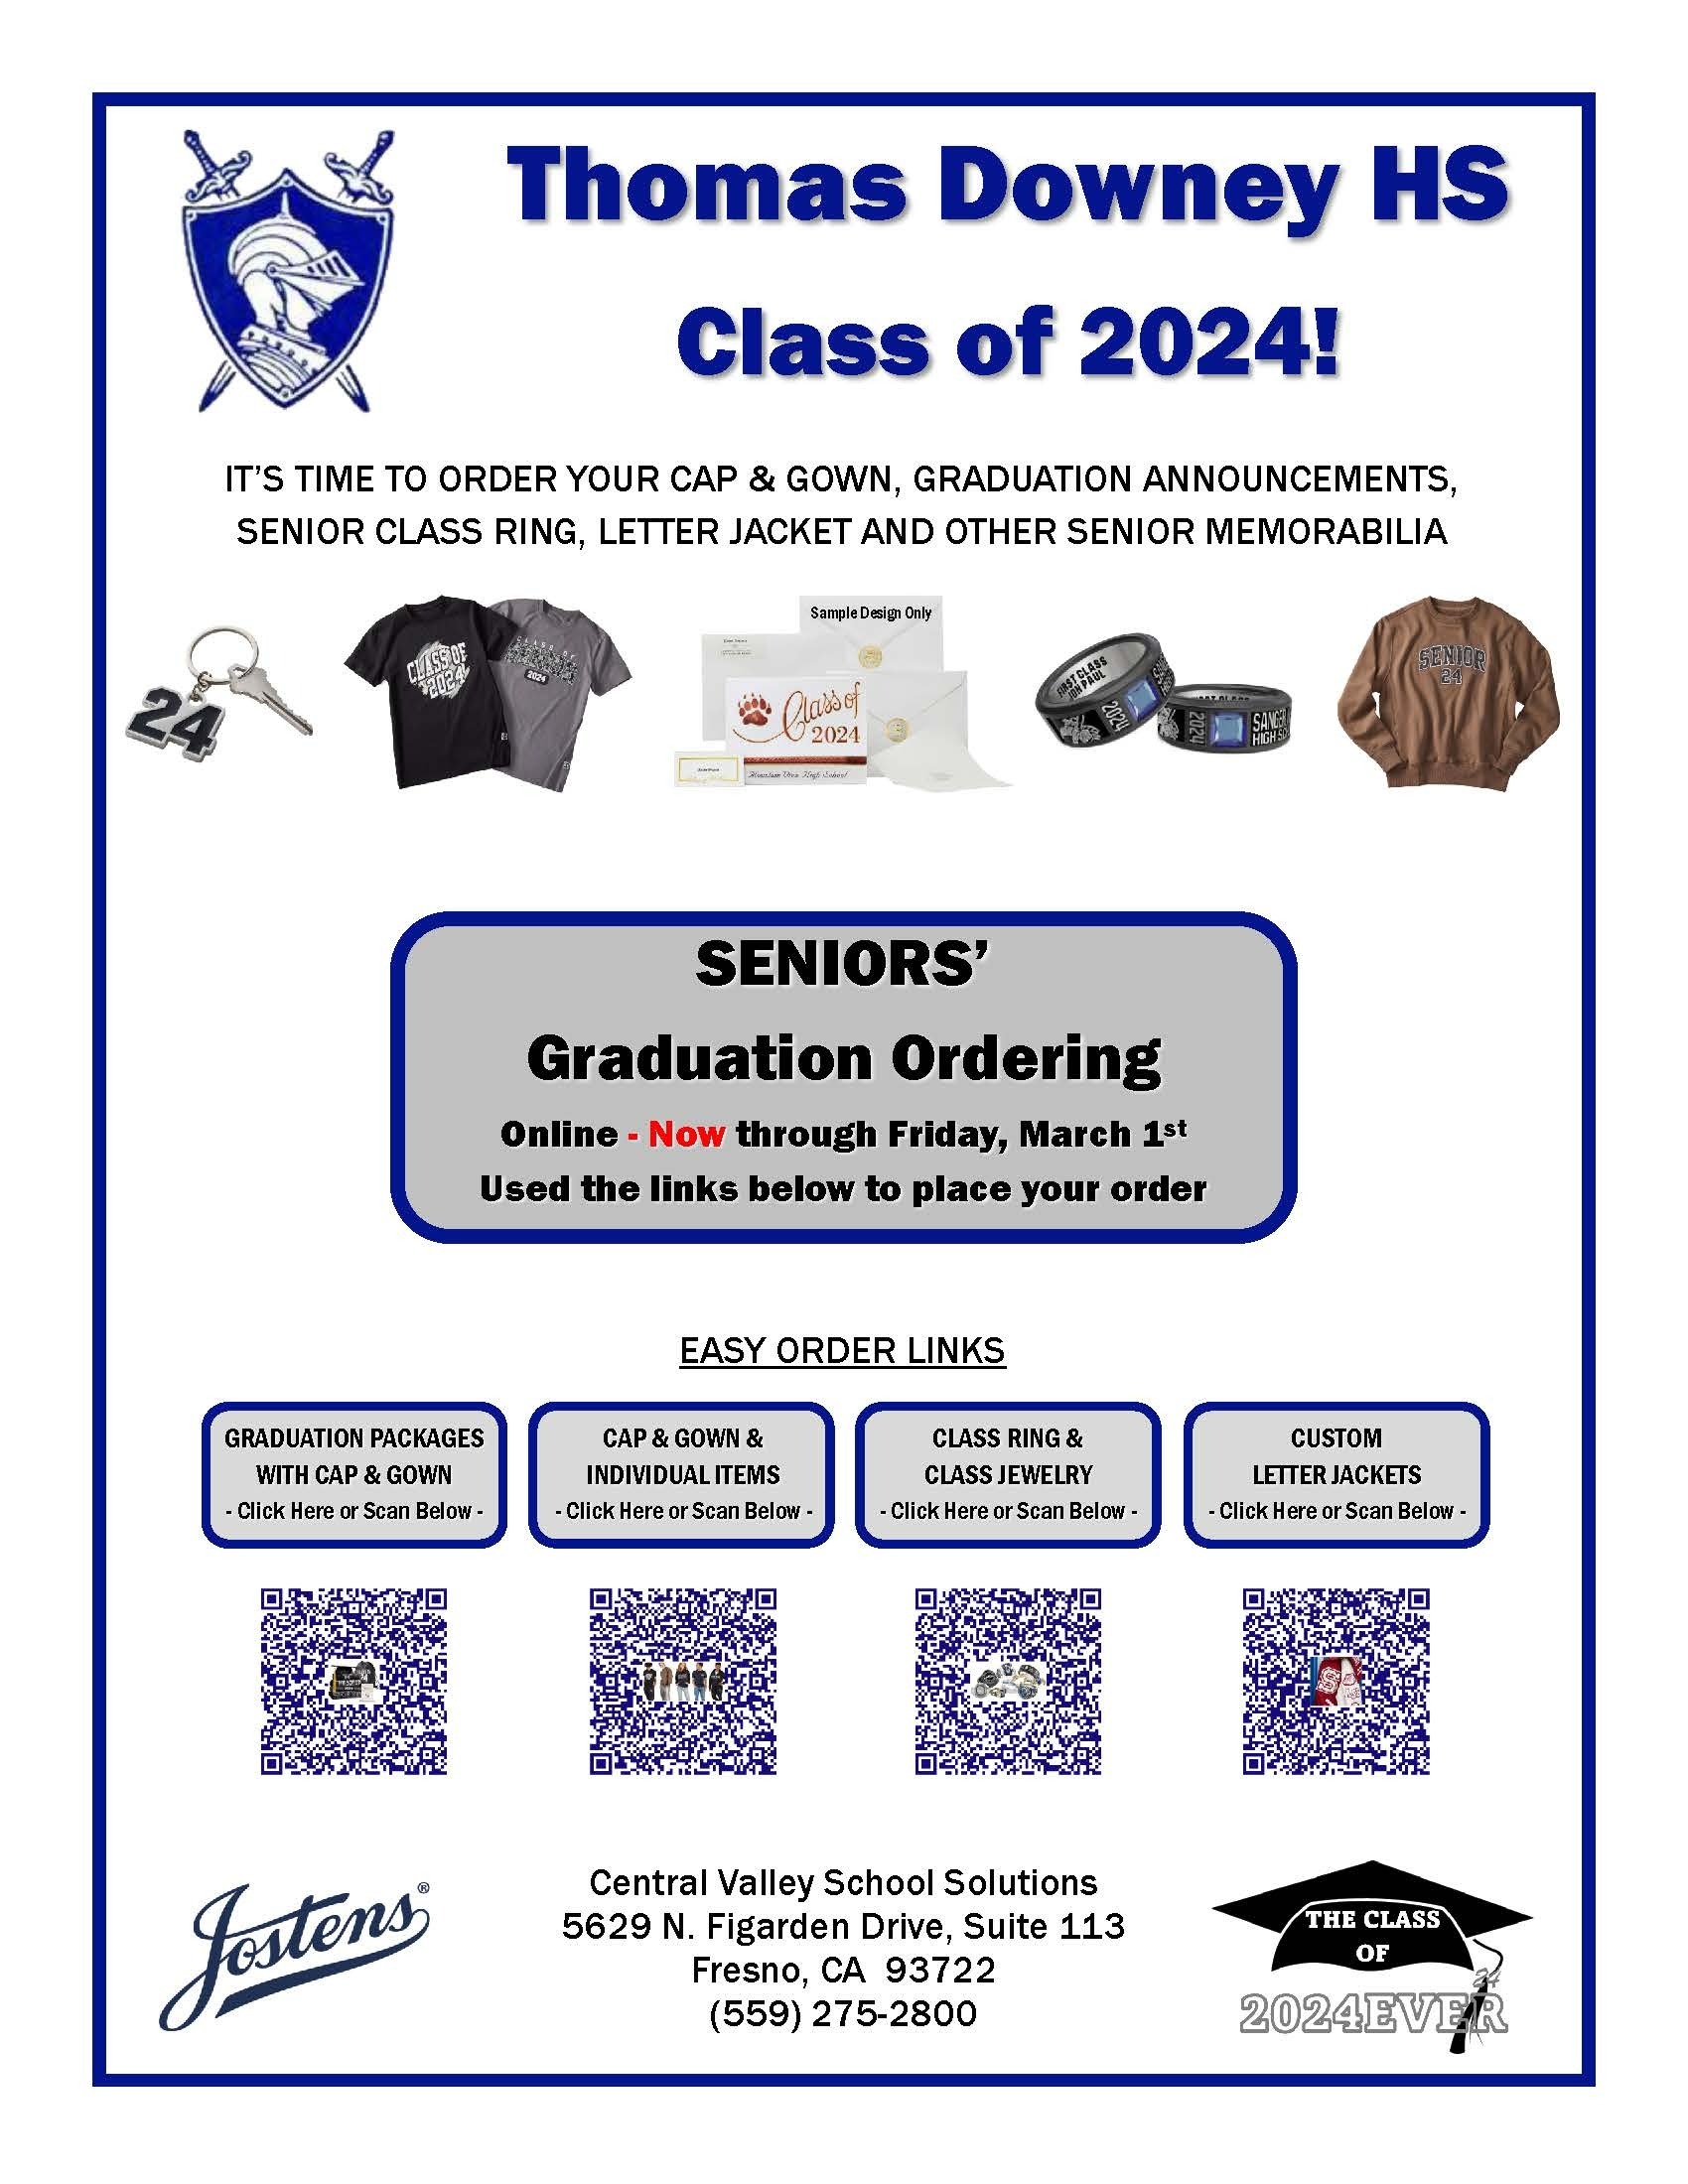 TDHS cap & Gown Prefered Deadline AD 